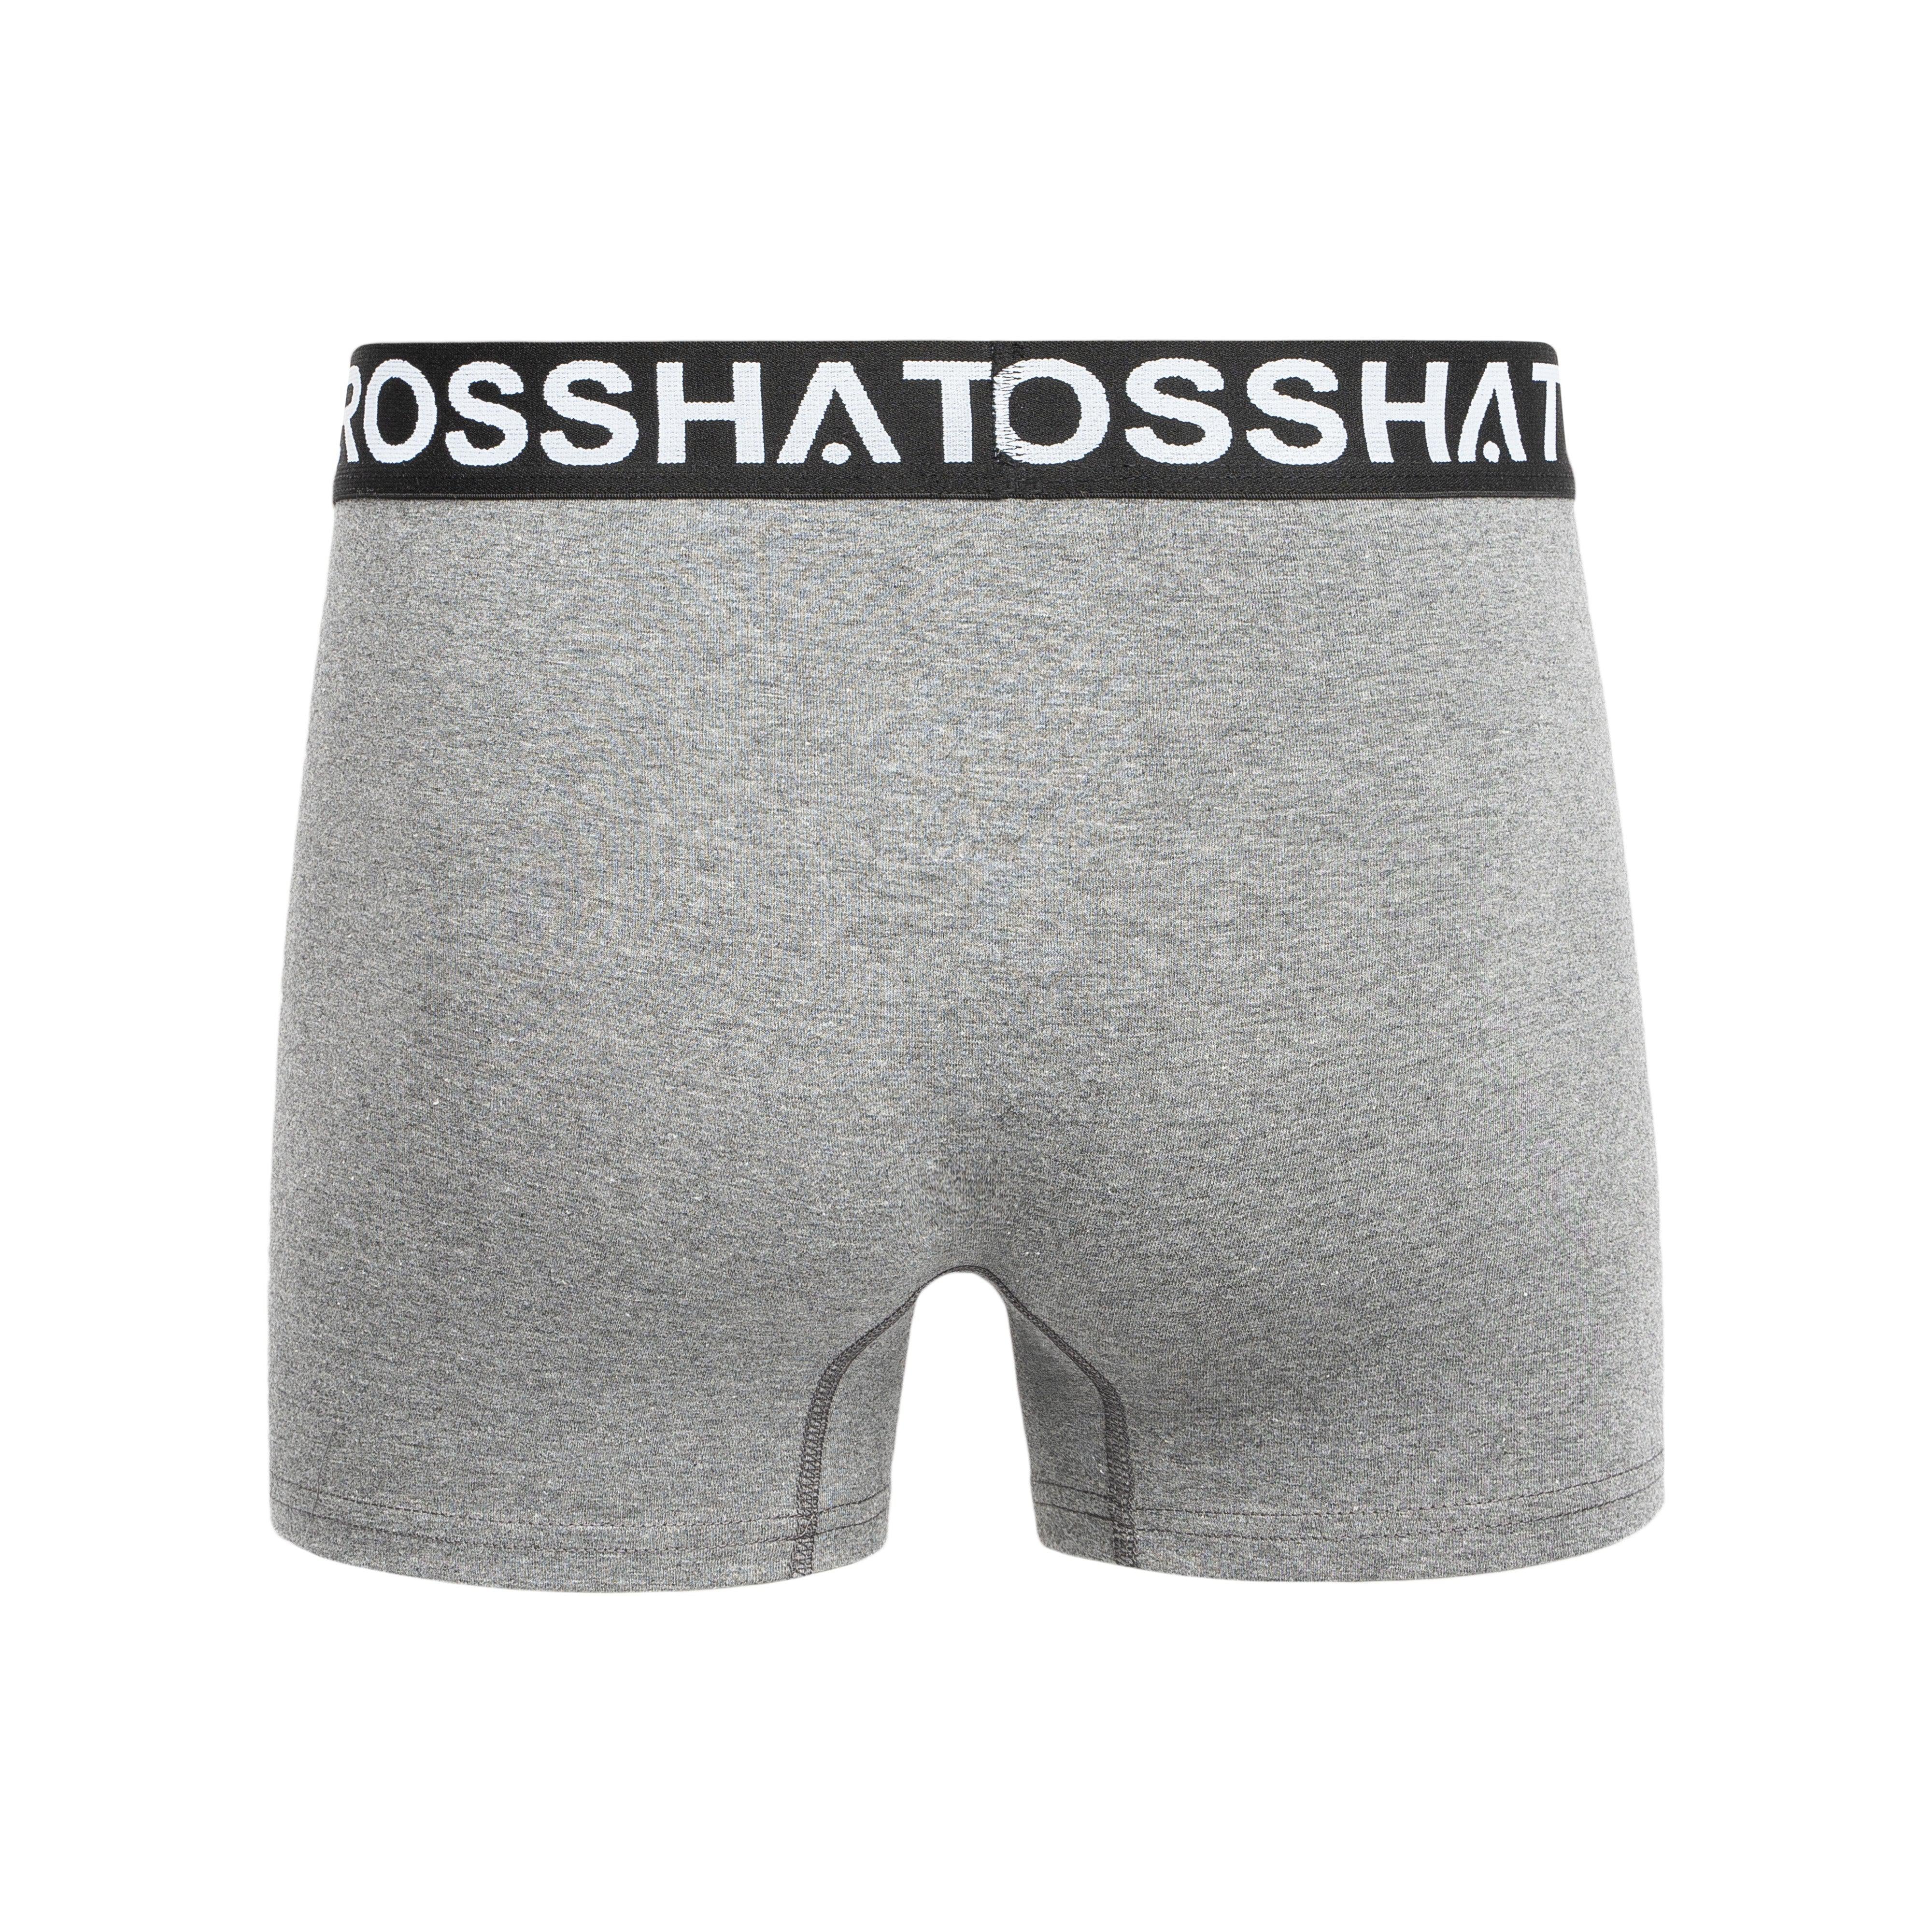 Astral Boxers 5pk Charcoal Marl